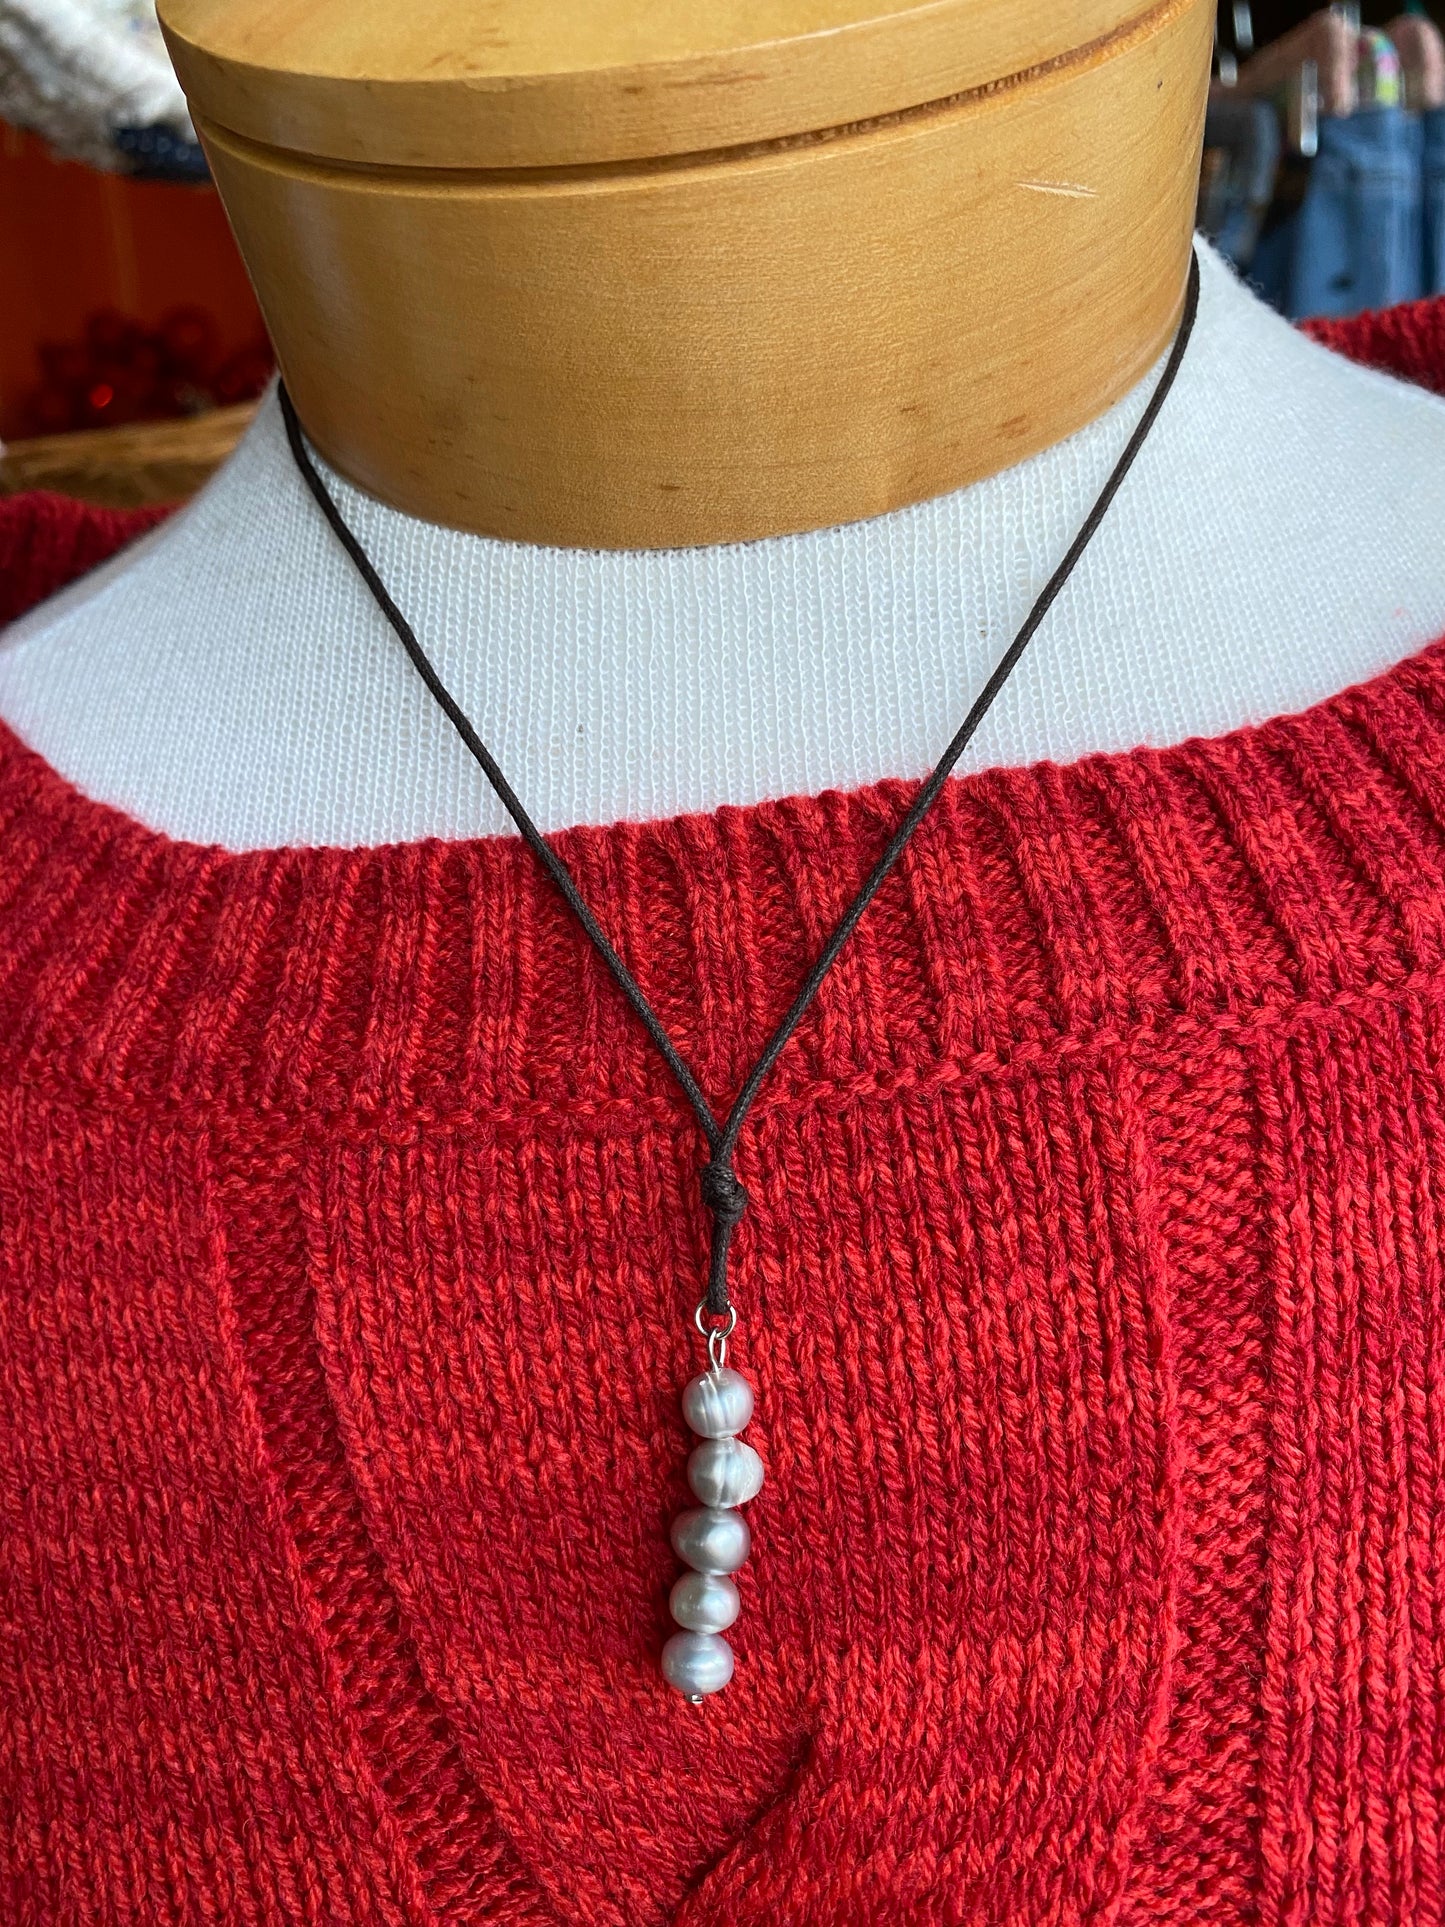 5 pearl beaded drop necklace handmade on leather cord